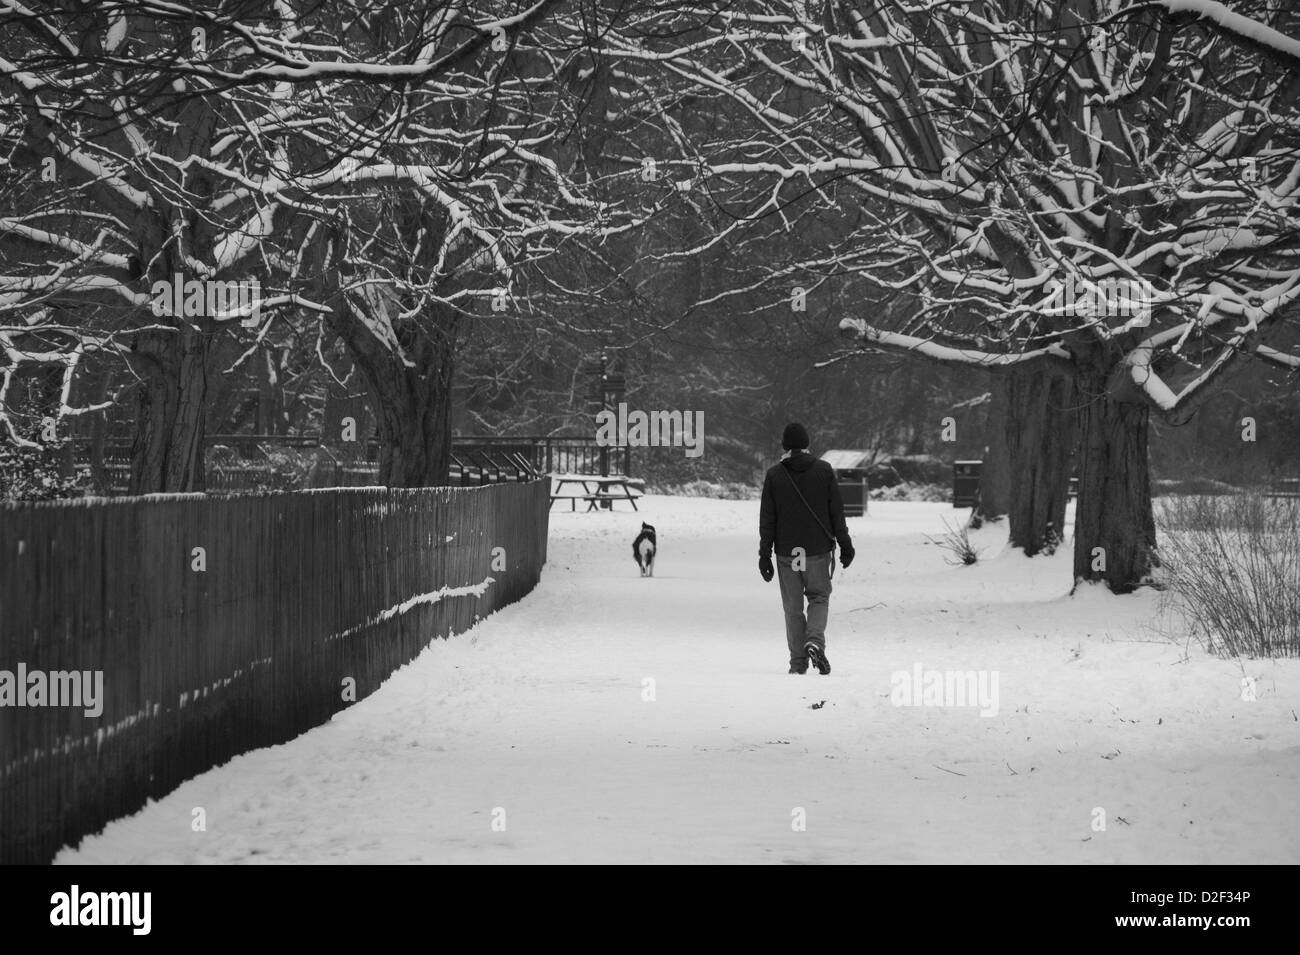 Man walking dog in snow on tree lined path Stock Photo